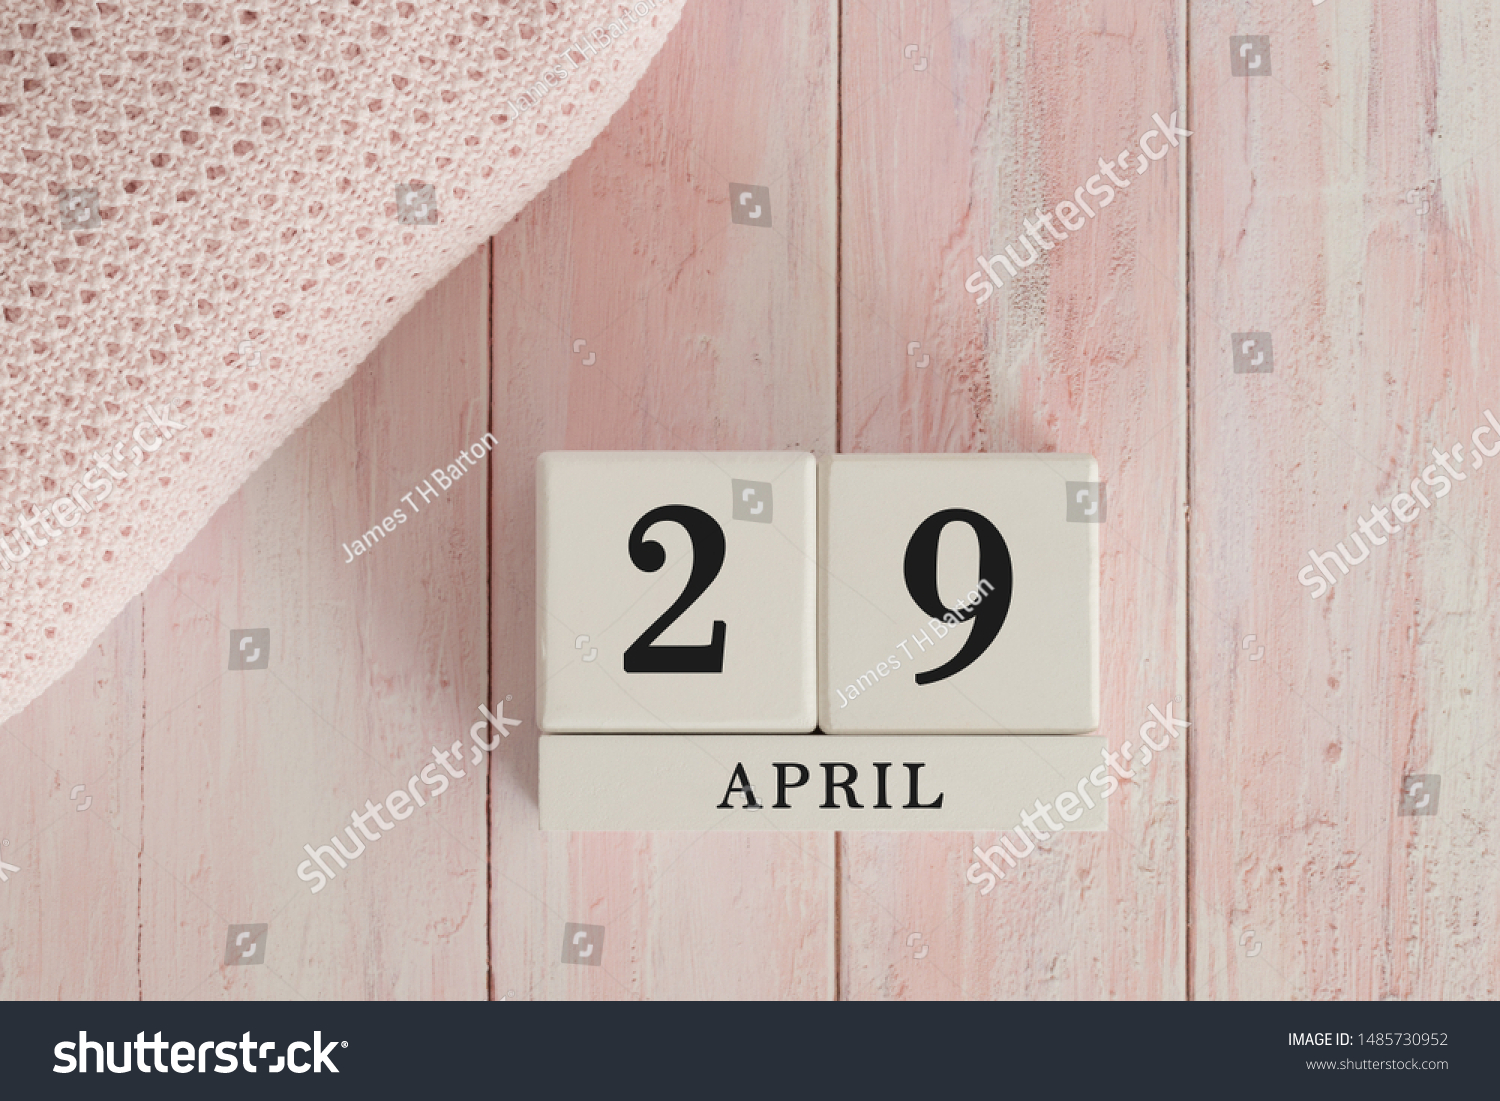 29 April Date on Cubes. Date on painted pink wood, next to baby blanket. Theme of baby due dates and birth dates. #1485730952